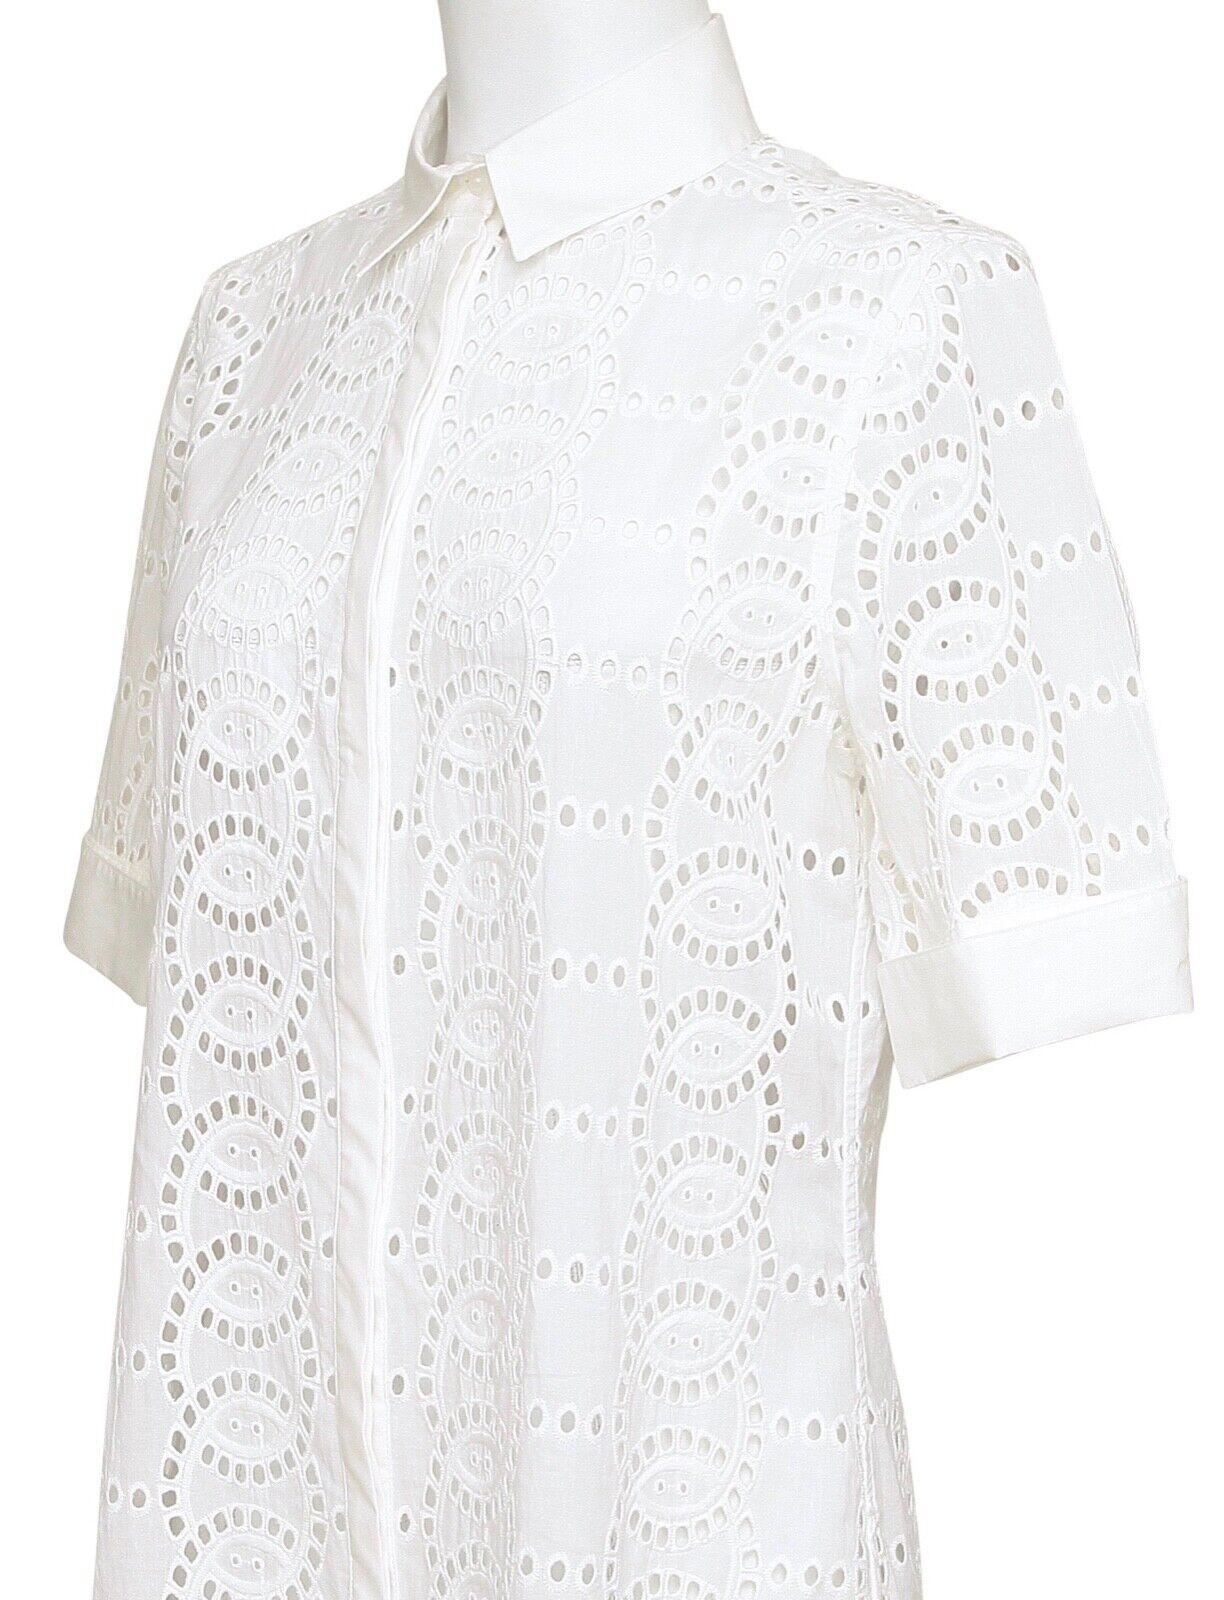 Women's ANNE FONTAINE Shirt Dress White Short Sleeve Button Down Eyelet Collar Cotton 40 For Sale